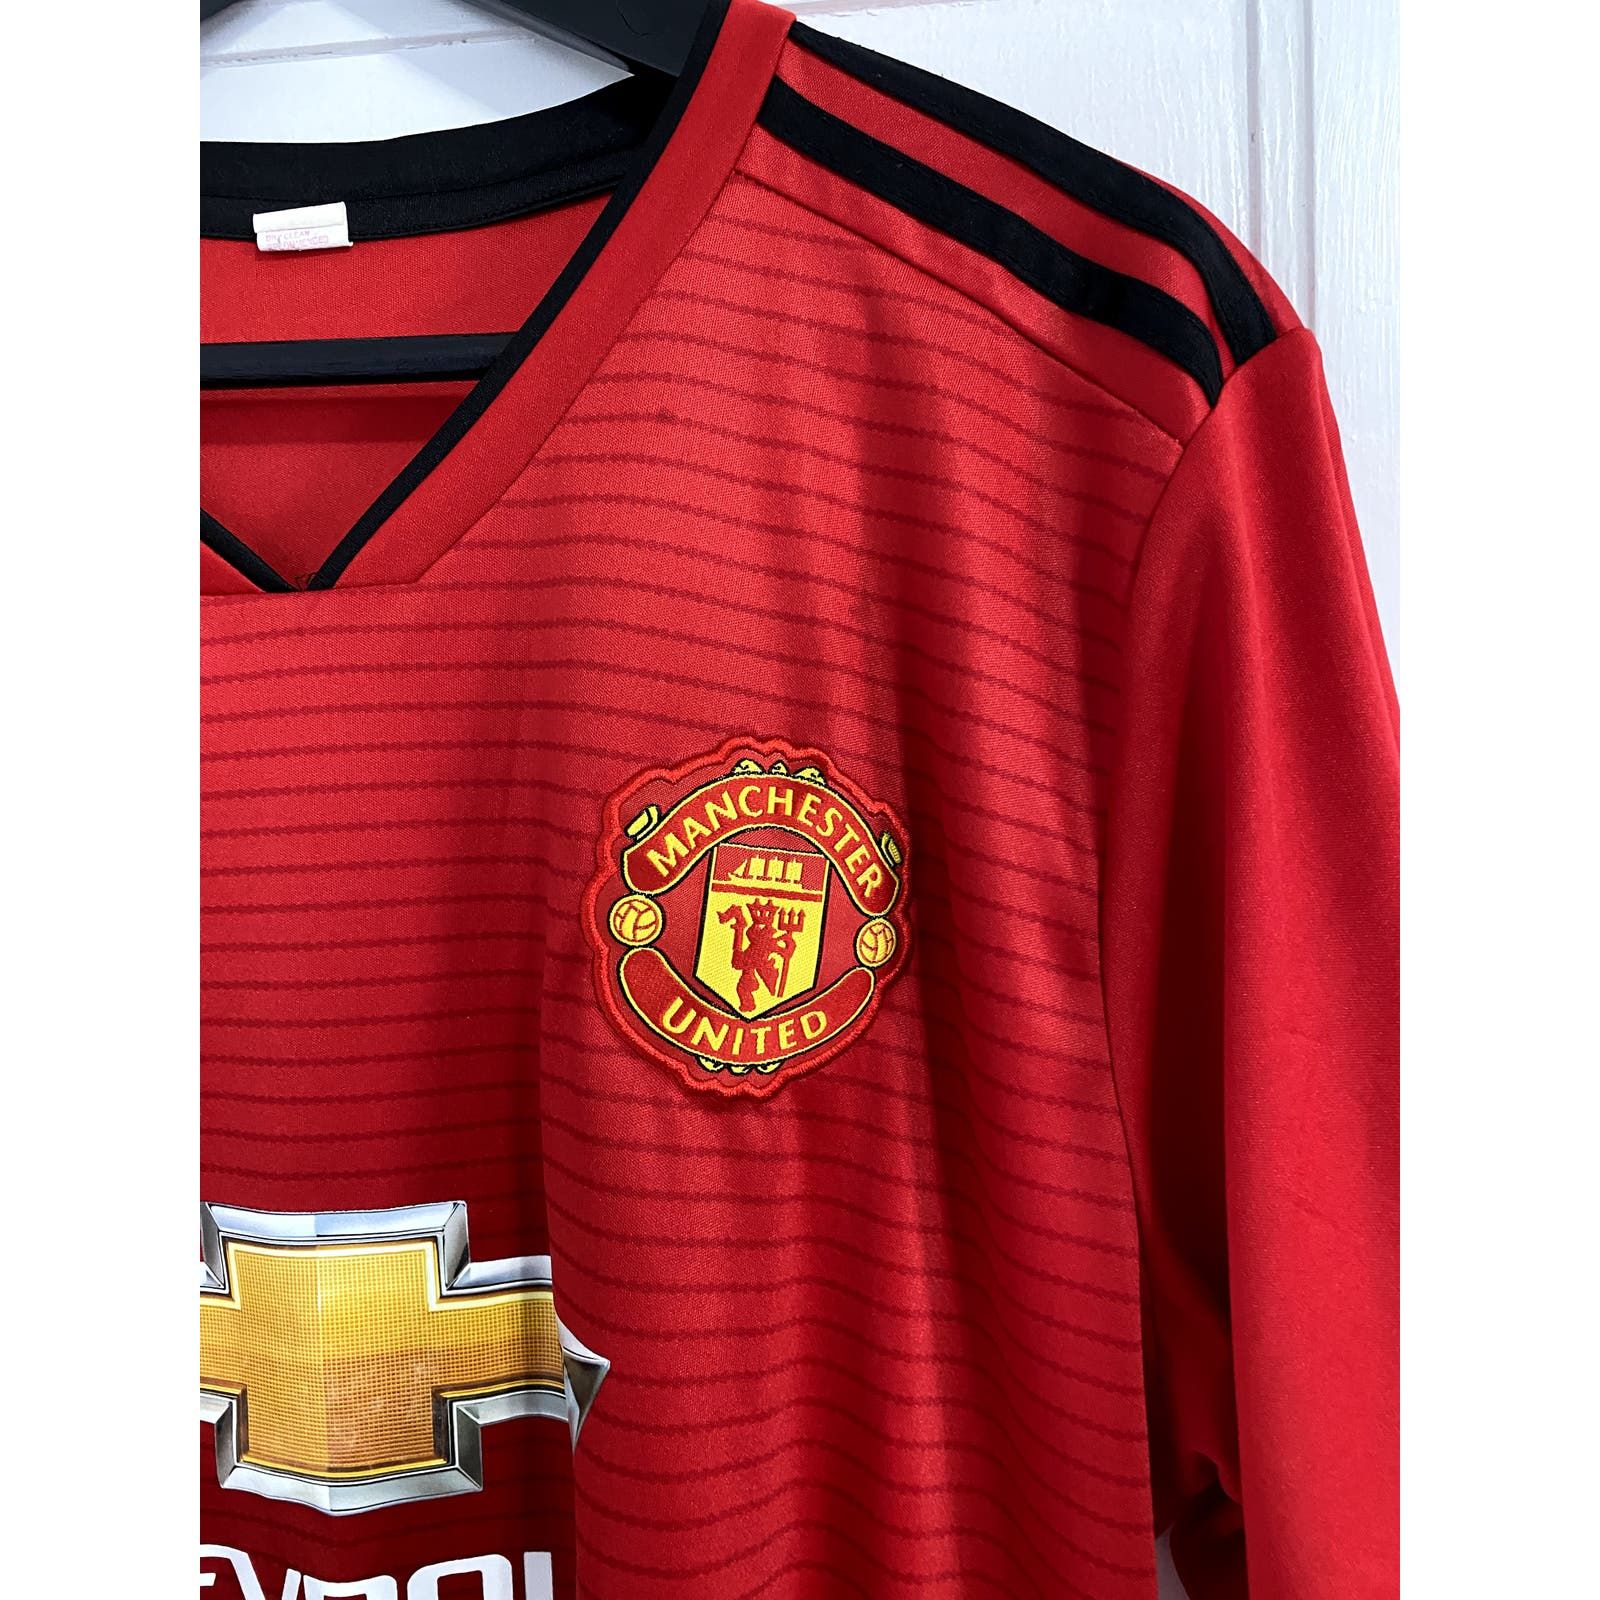 Manchester United Manchester United FC Soccer Jersey Size XL Size US XL / EU 56 / 4 - 3 Thumbnail